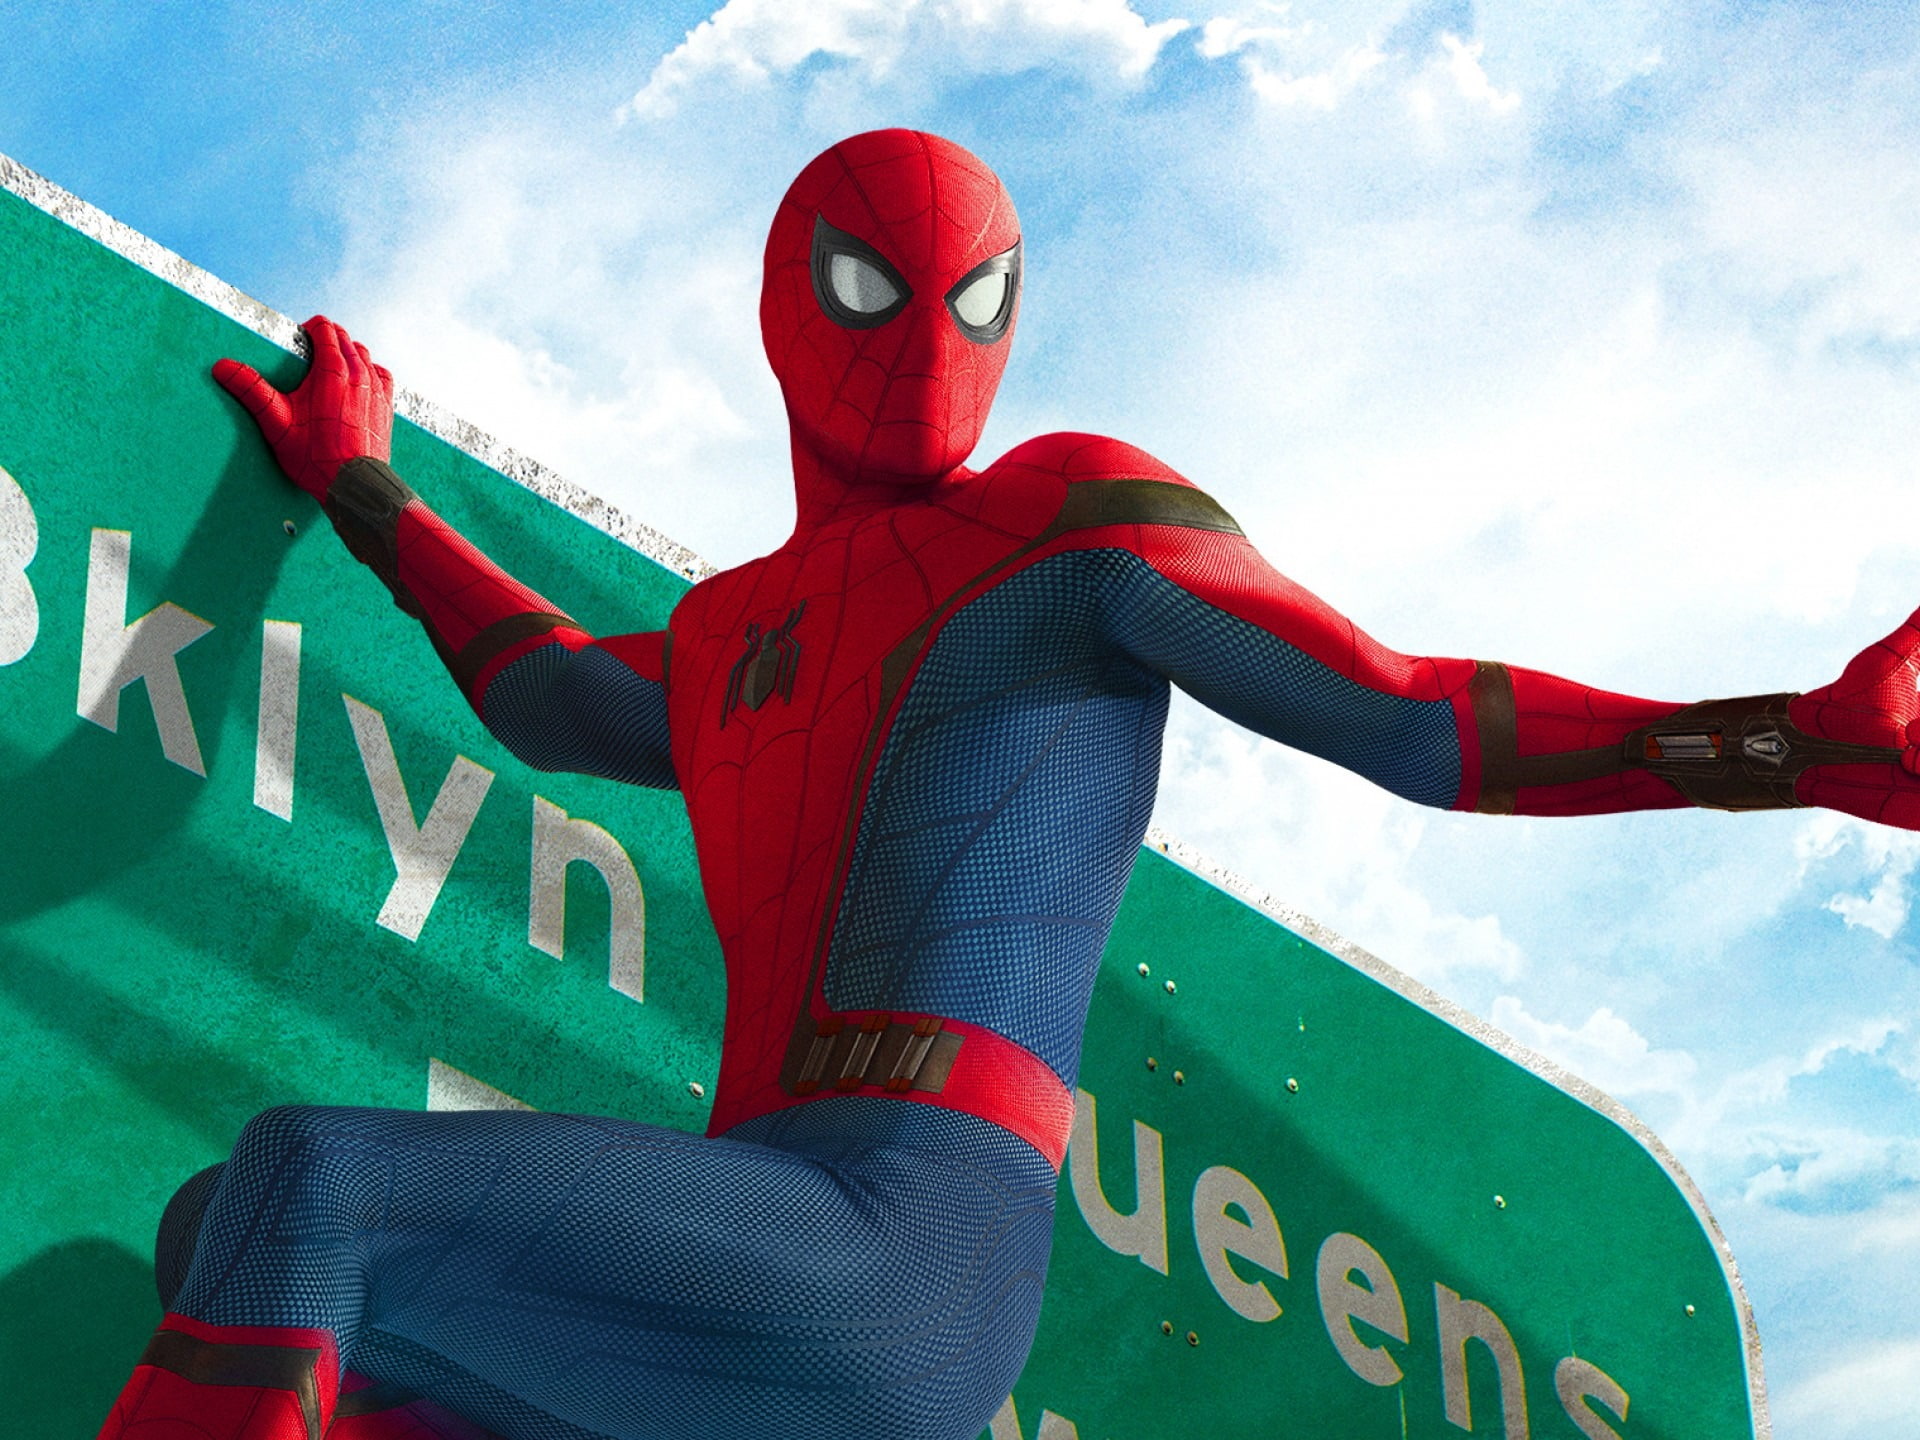 Spider Man Homecoming-2017 Movie HD Wallpapers, cloud - sky, one person